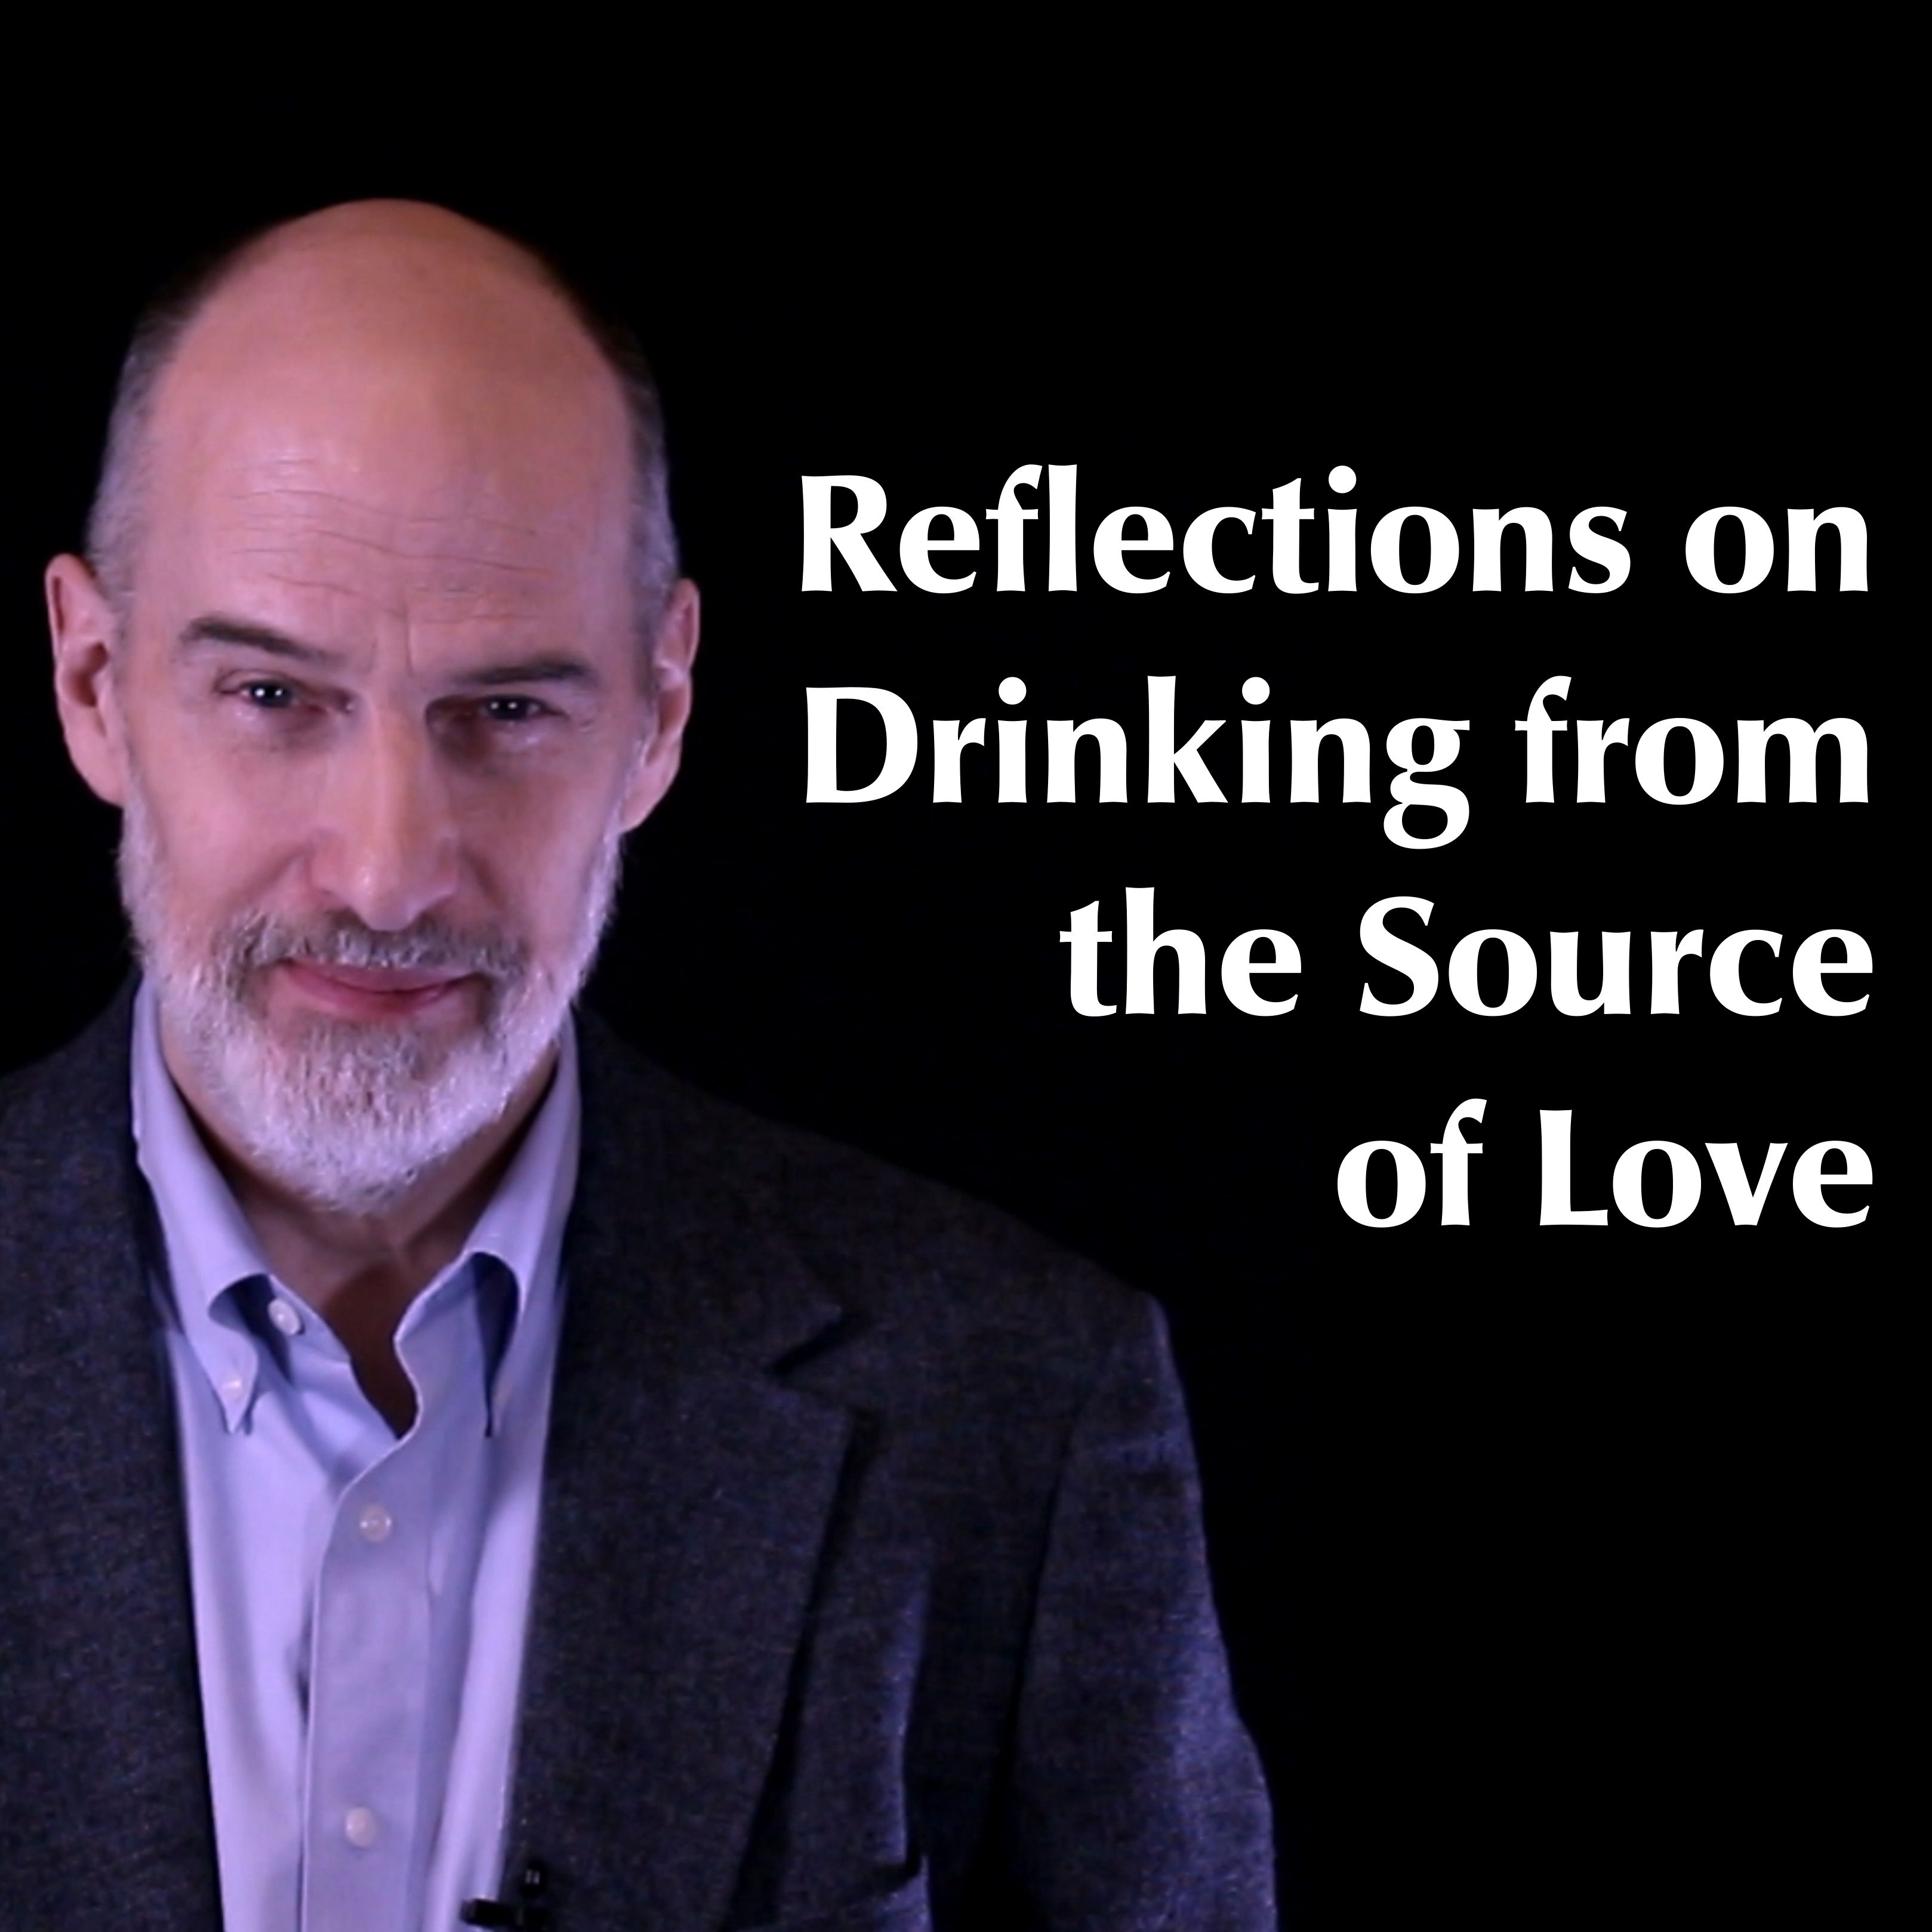 Reflections on Drinking from the Source of Love